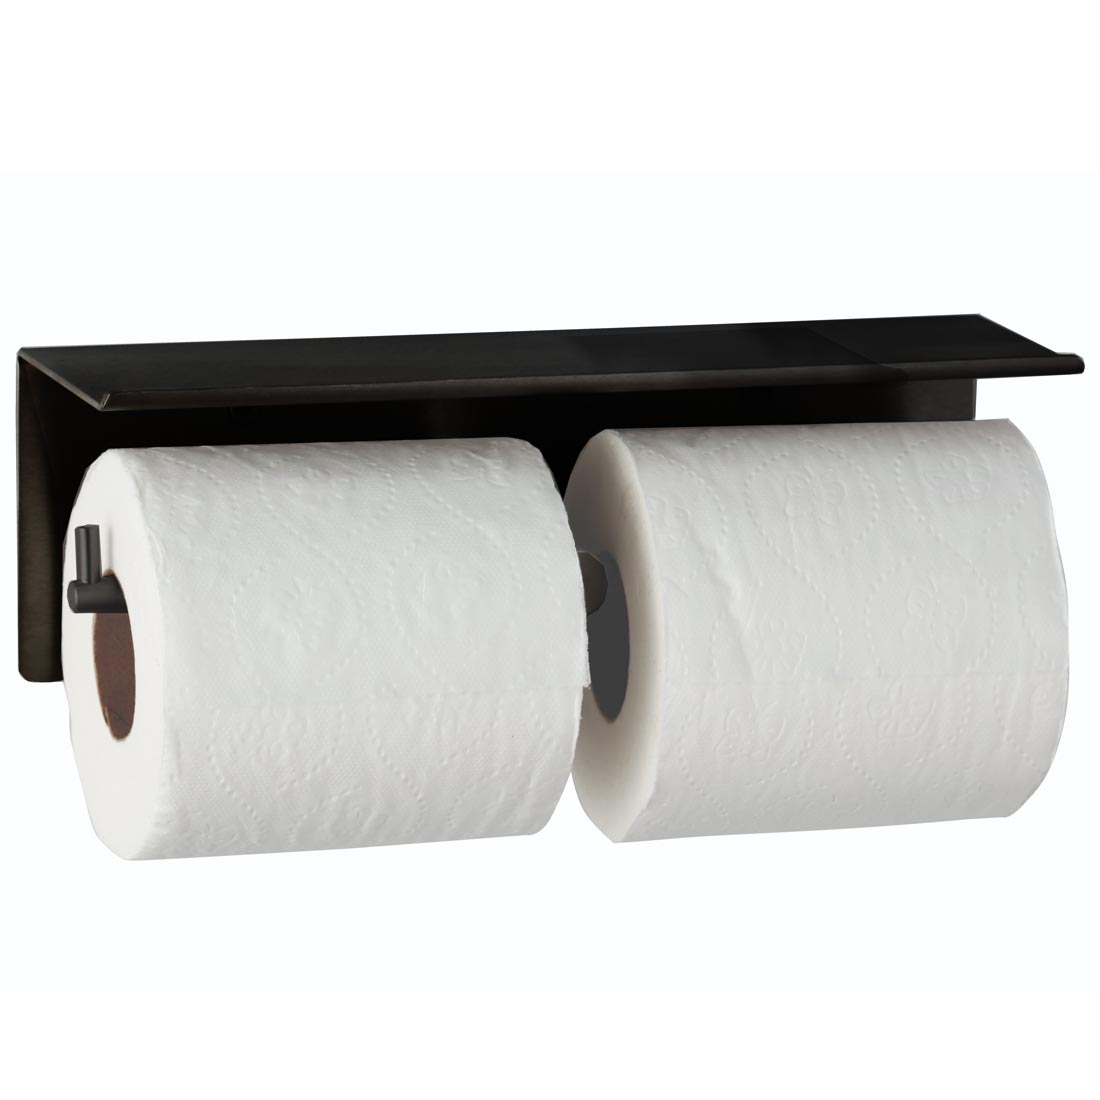 ASI 7305-2-41 Matte Black - Toilet Tissue Holder - Double - Powder Coated Stainless - Surface Mounted